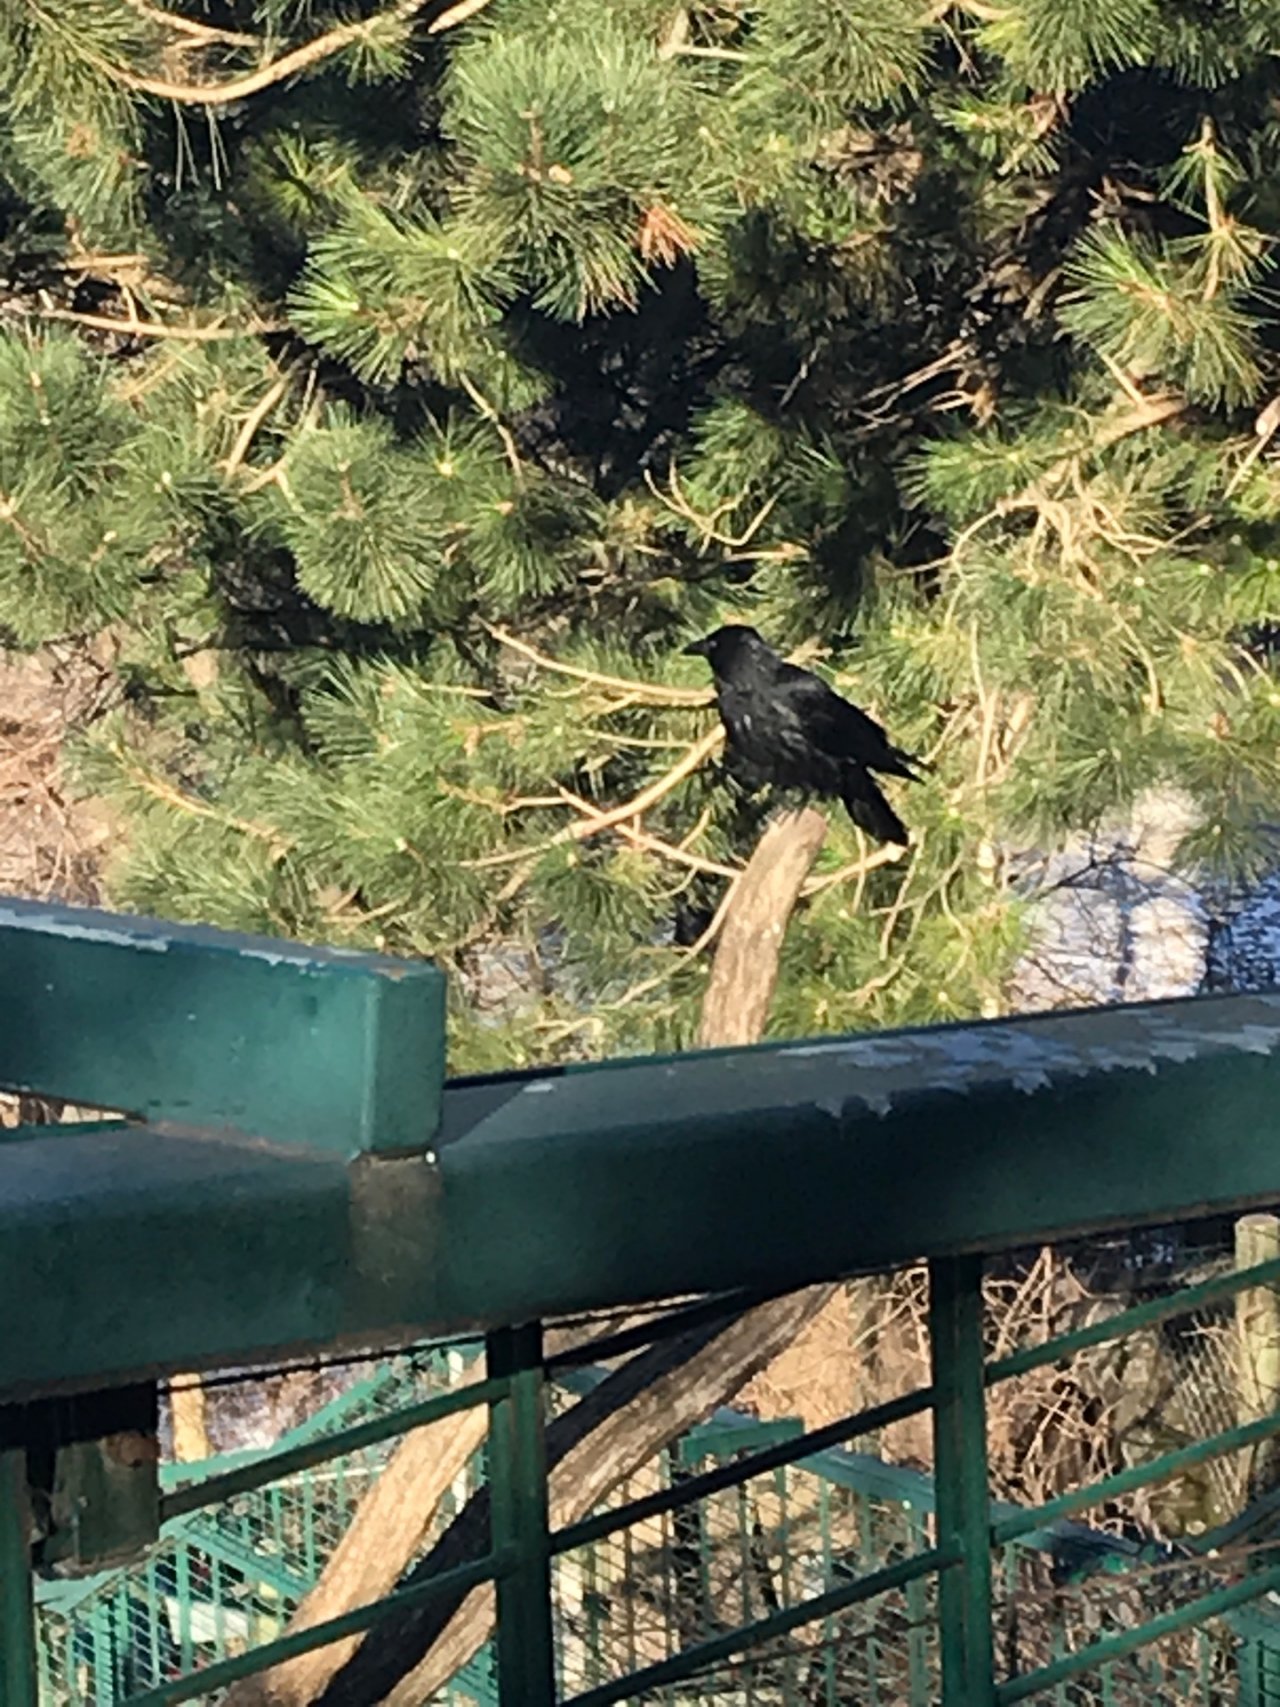 Carrion Crow in KraMobil App spotted by TheMedicineMan on 14.02.2021